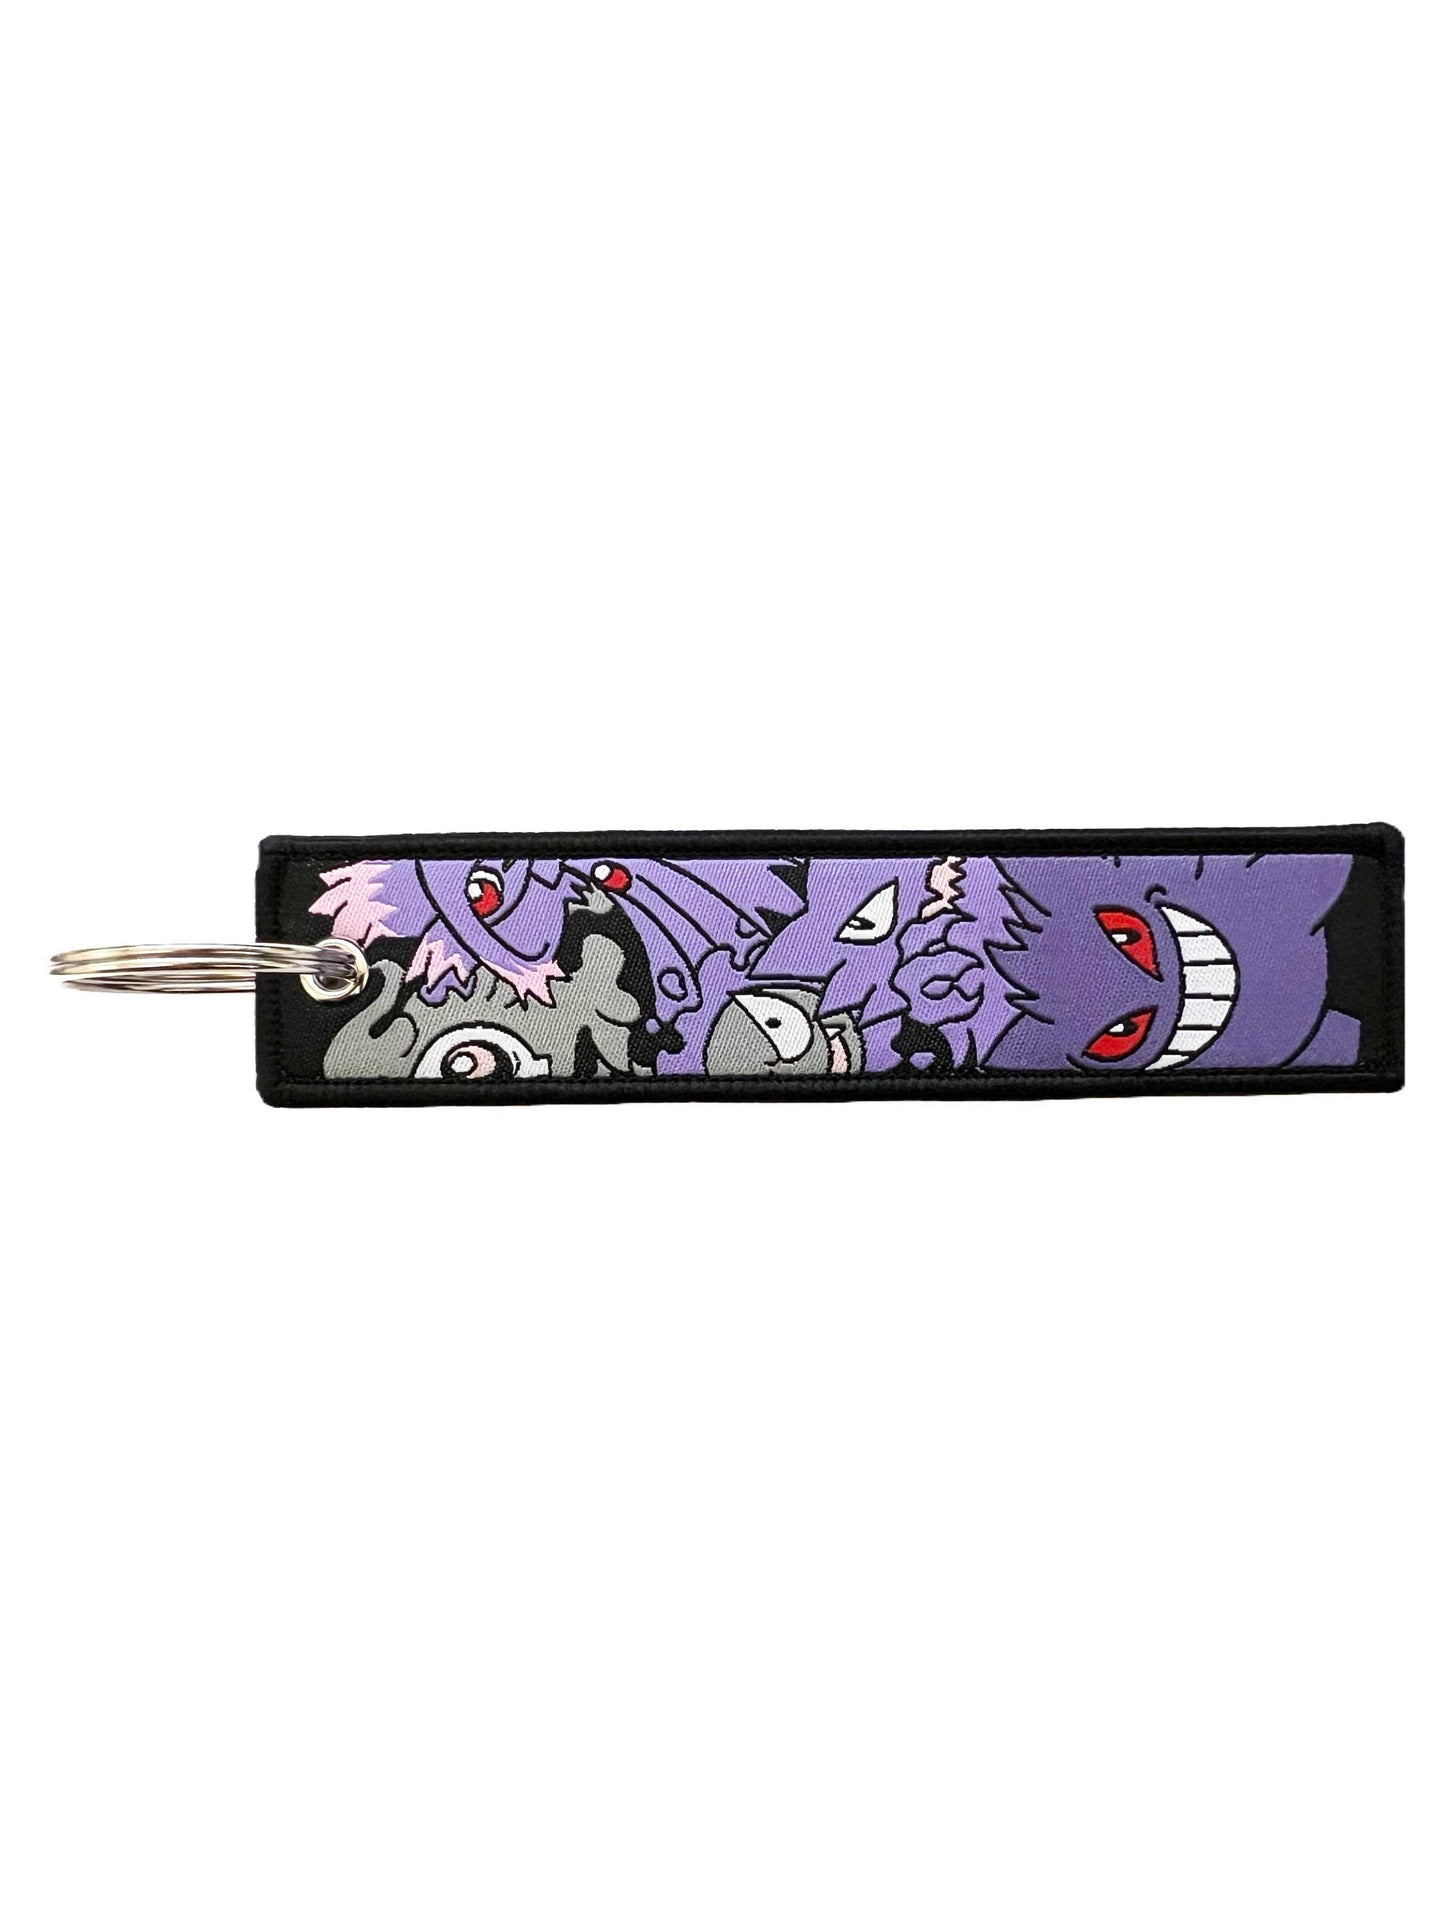 Pokemon Gengar Character Themed Set of One Embroidered Fabric Keychain and One Enamel Metal Pin Badge